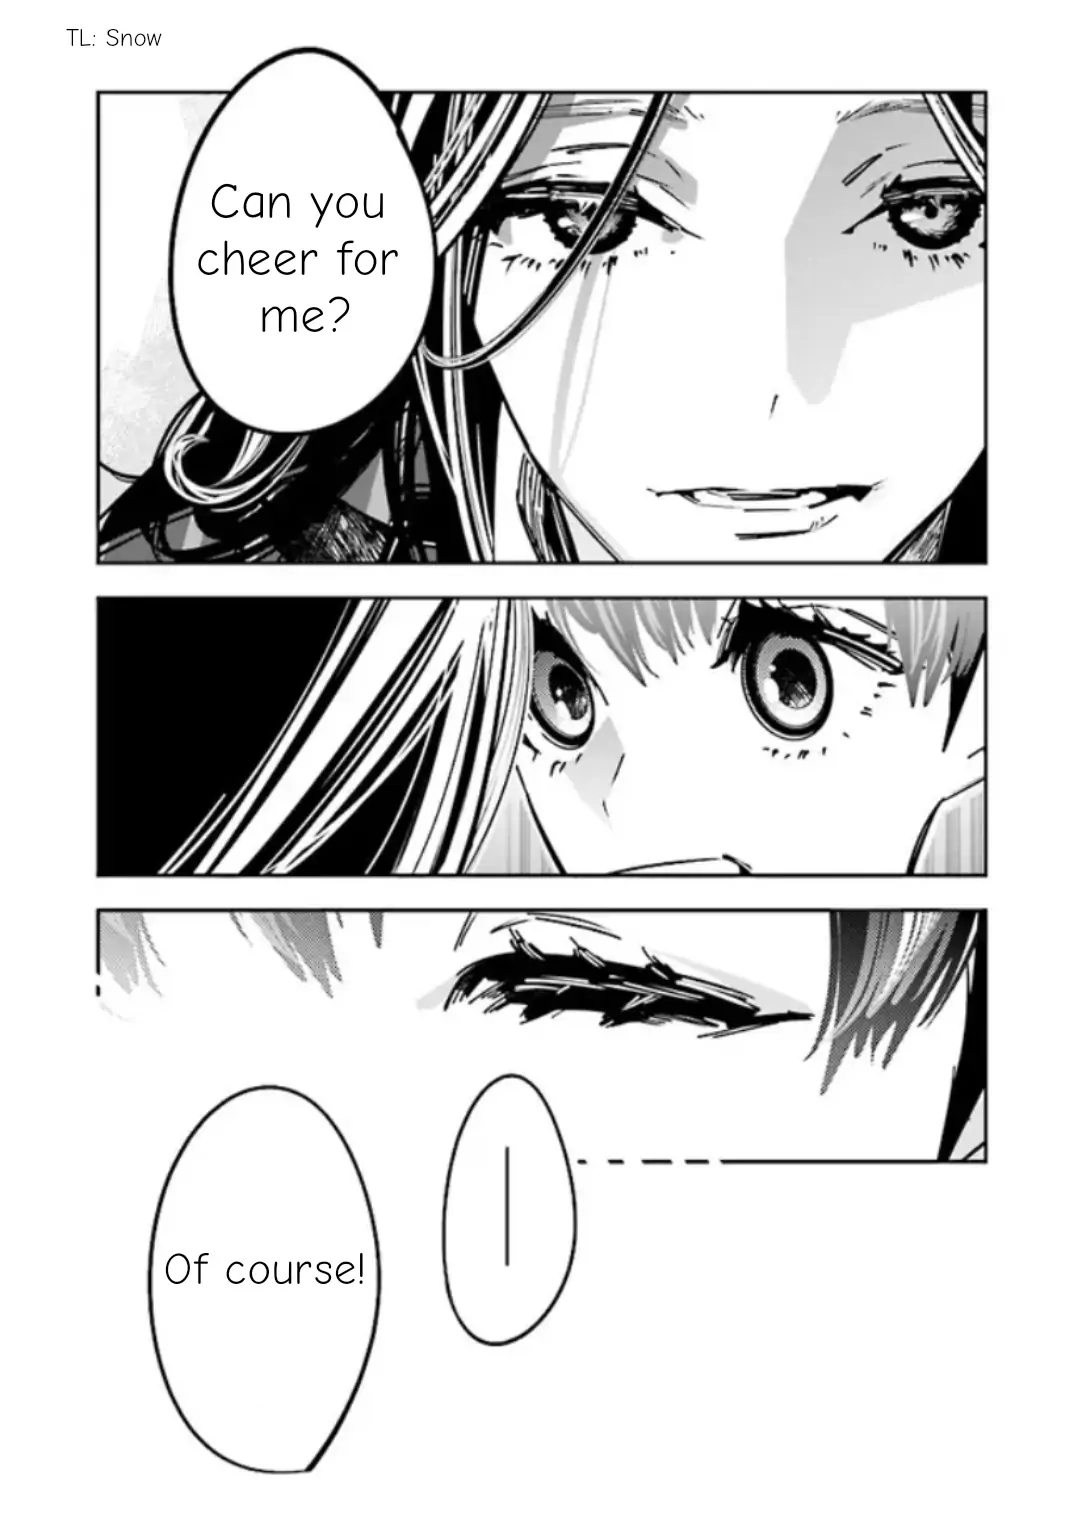 I Reincarnated As The Little Sister Of A Death Game Manga's Murder Mastermind And Failed - chapter 10 - #6